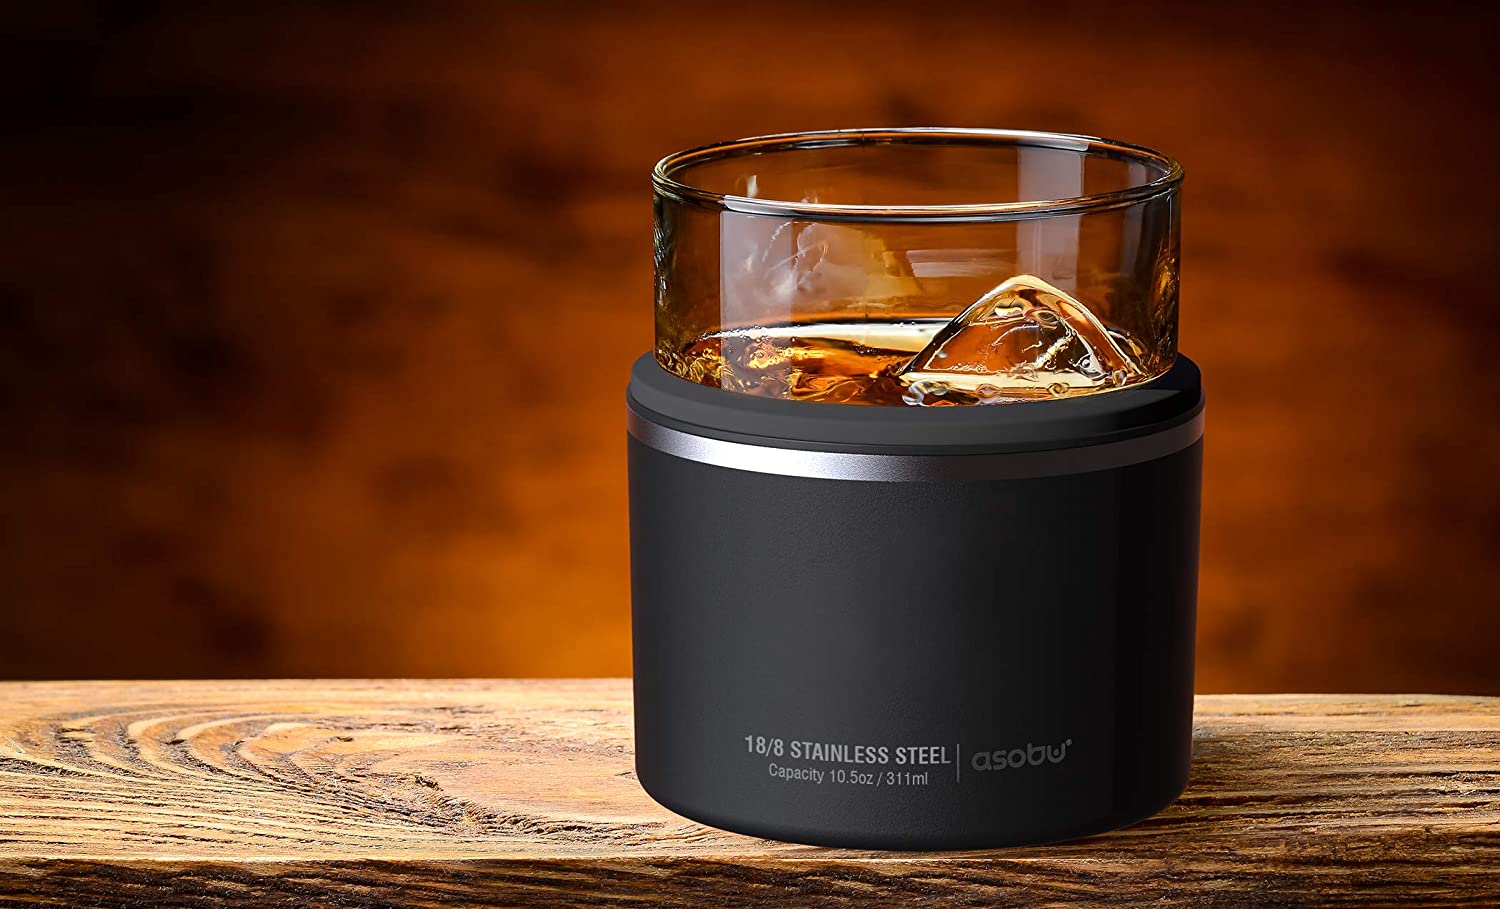 ASOBU On The Rocks 10.5oz Stainless Steel and Glass Insulated Whiskey  Sleeve with Whiskey Glass Wood